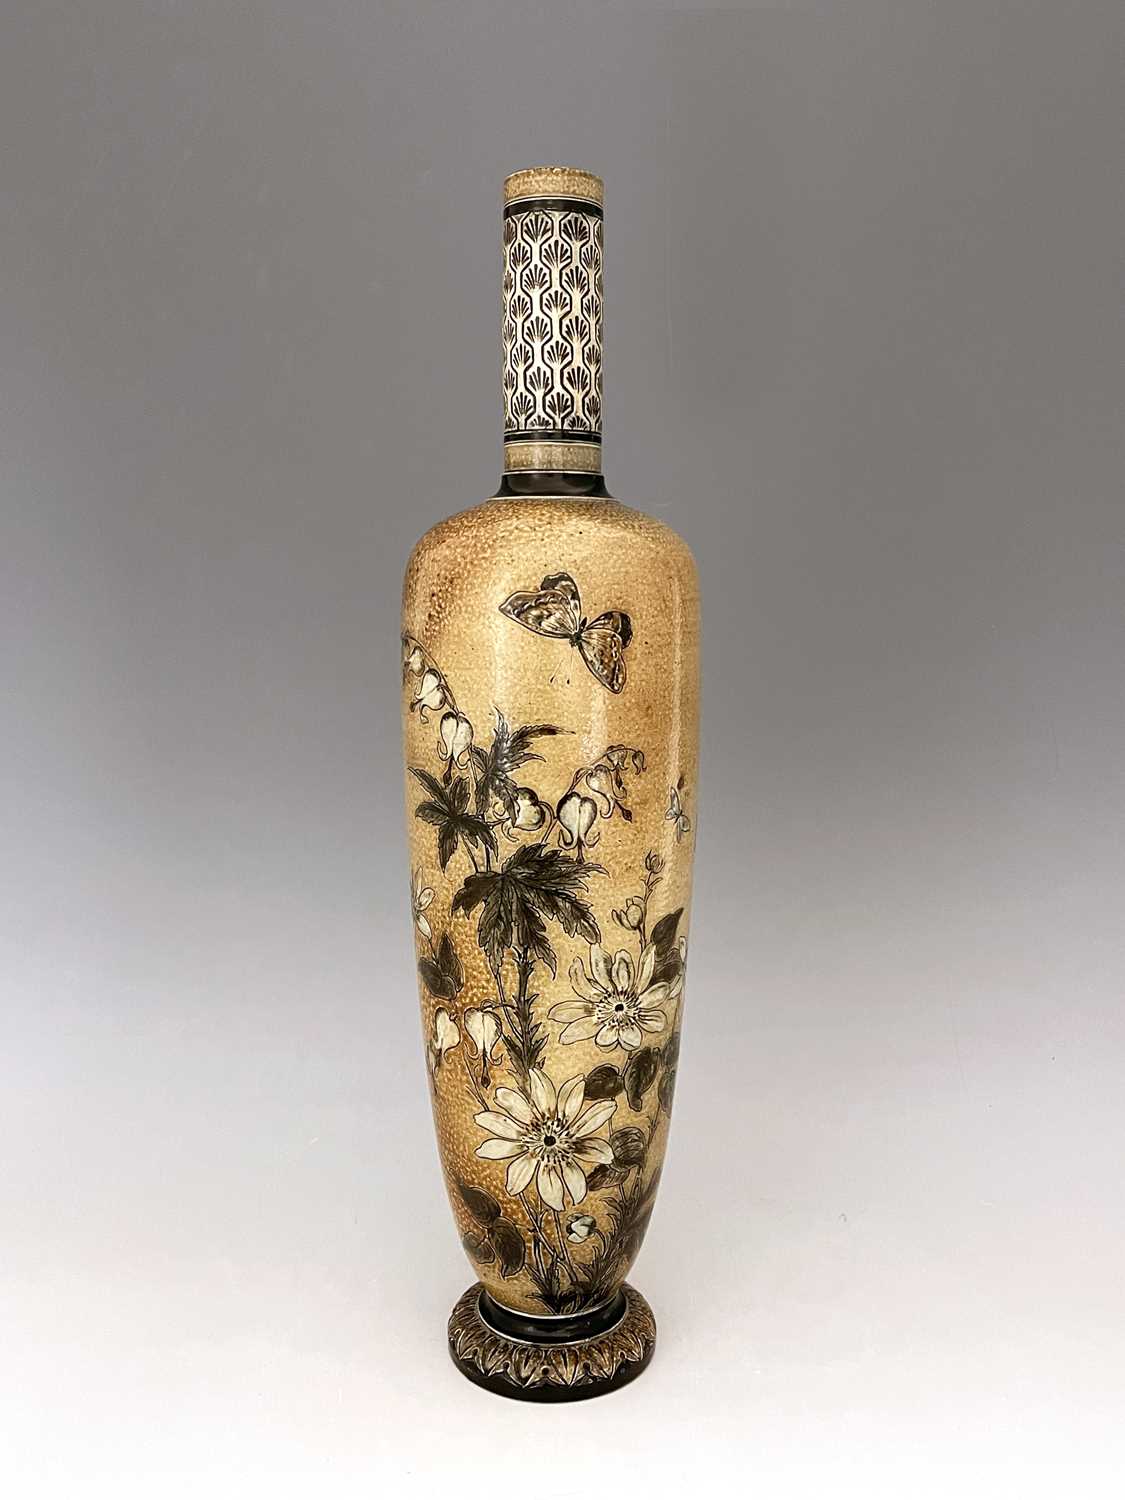 Edwin Martin for Martin Brothers, a large stoneware Wildflower vase, 1886, shouldered footed form - Image 5 of 6